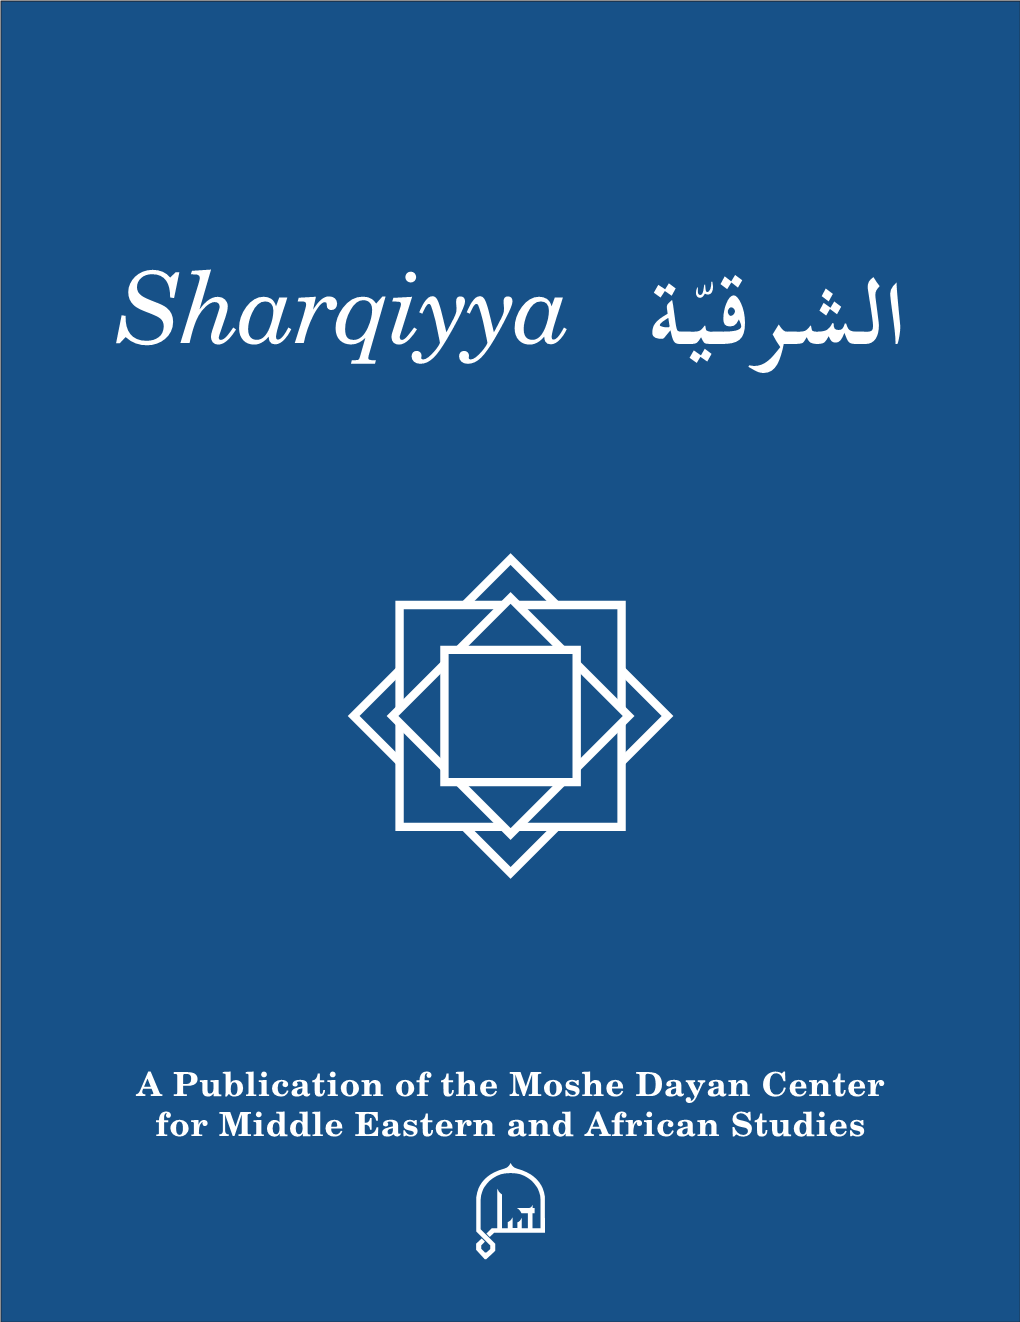 A Publication of the Moshe Dayan Center for Middle Eastern and African Studies Sharqiyya